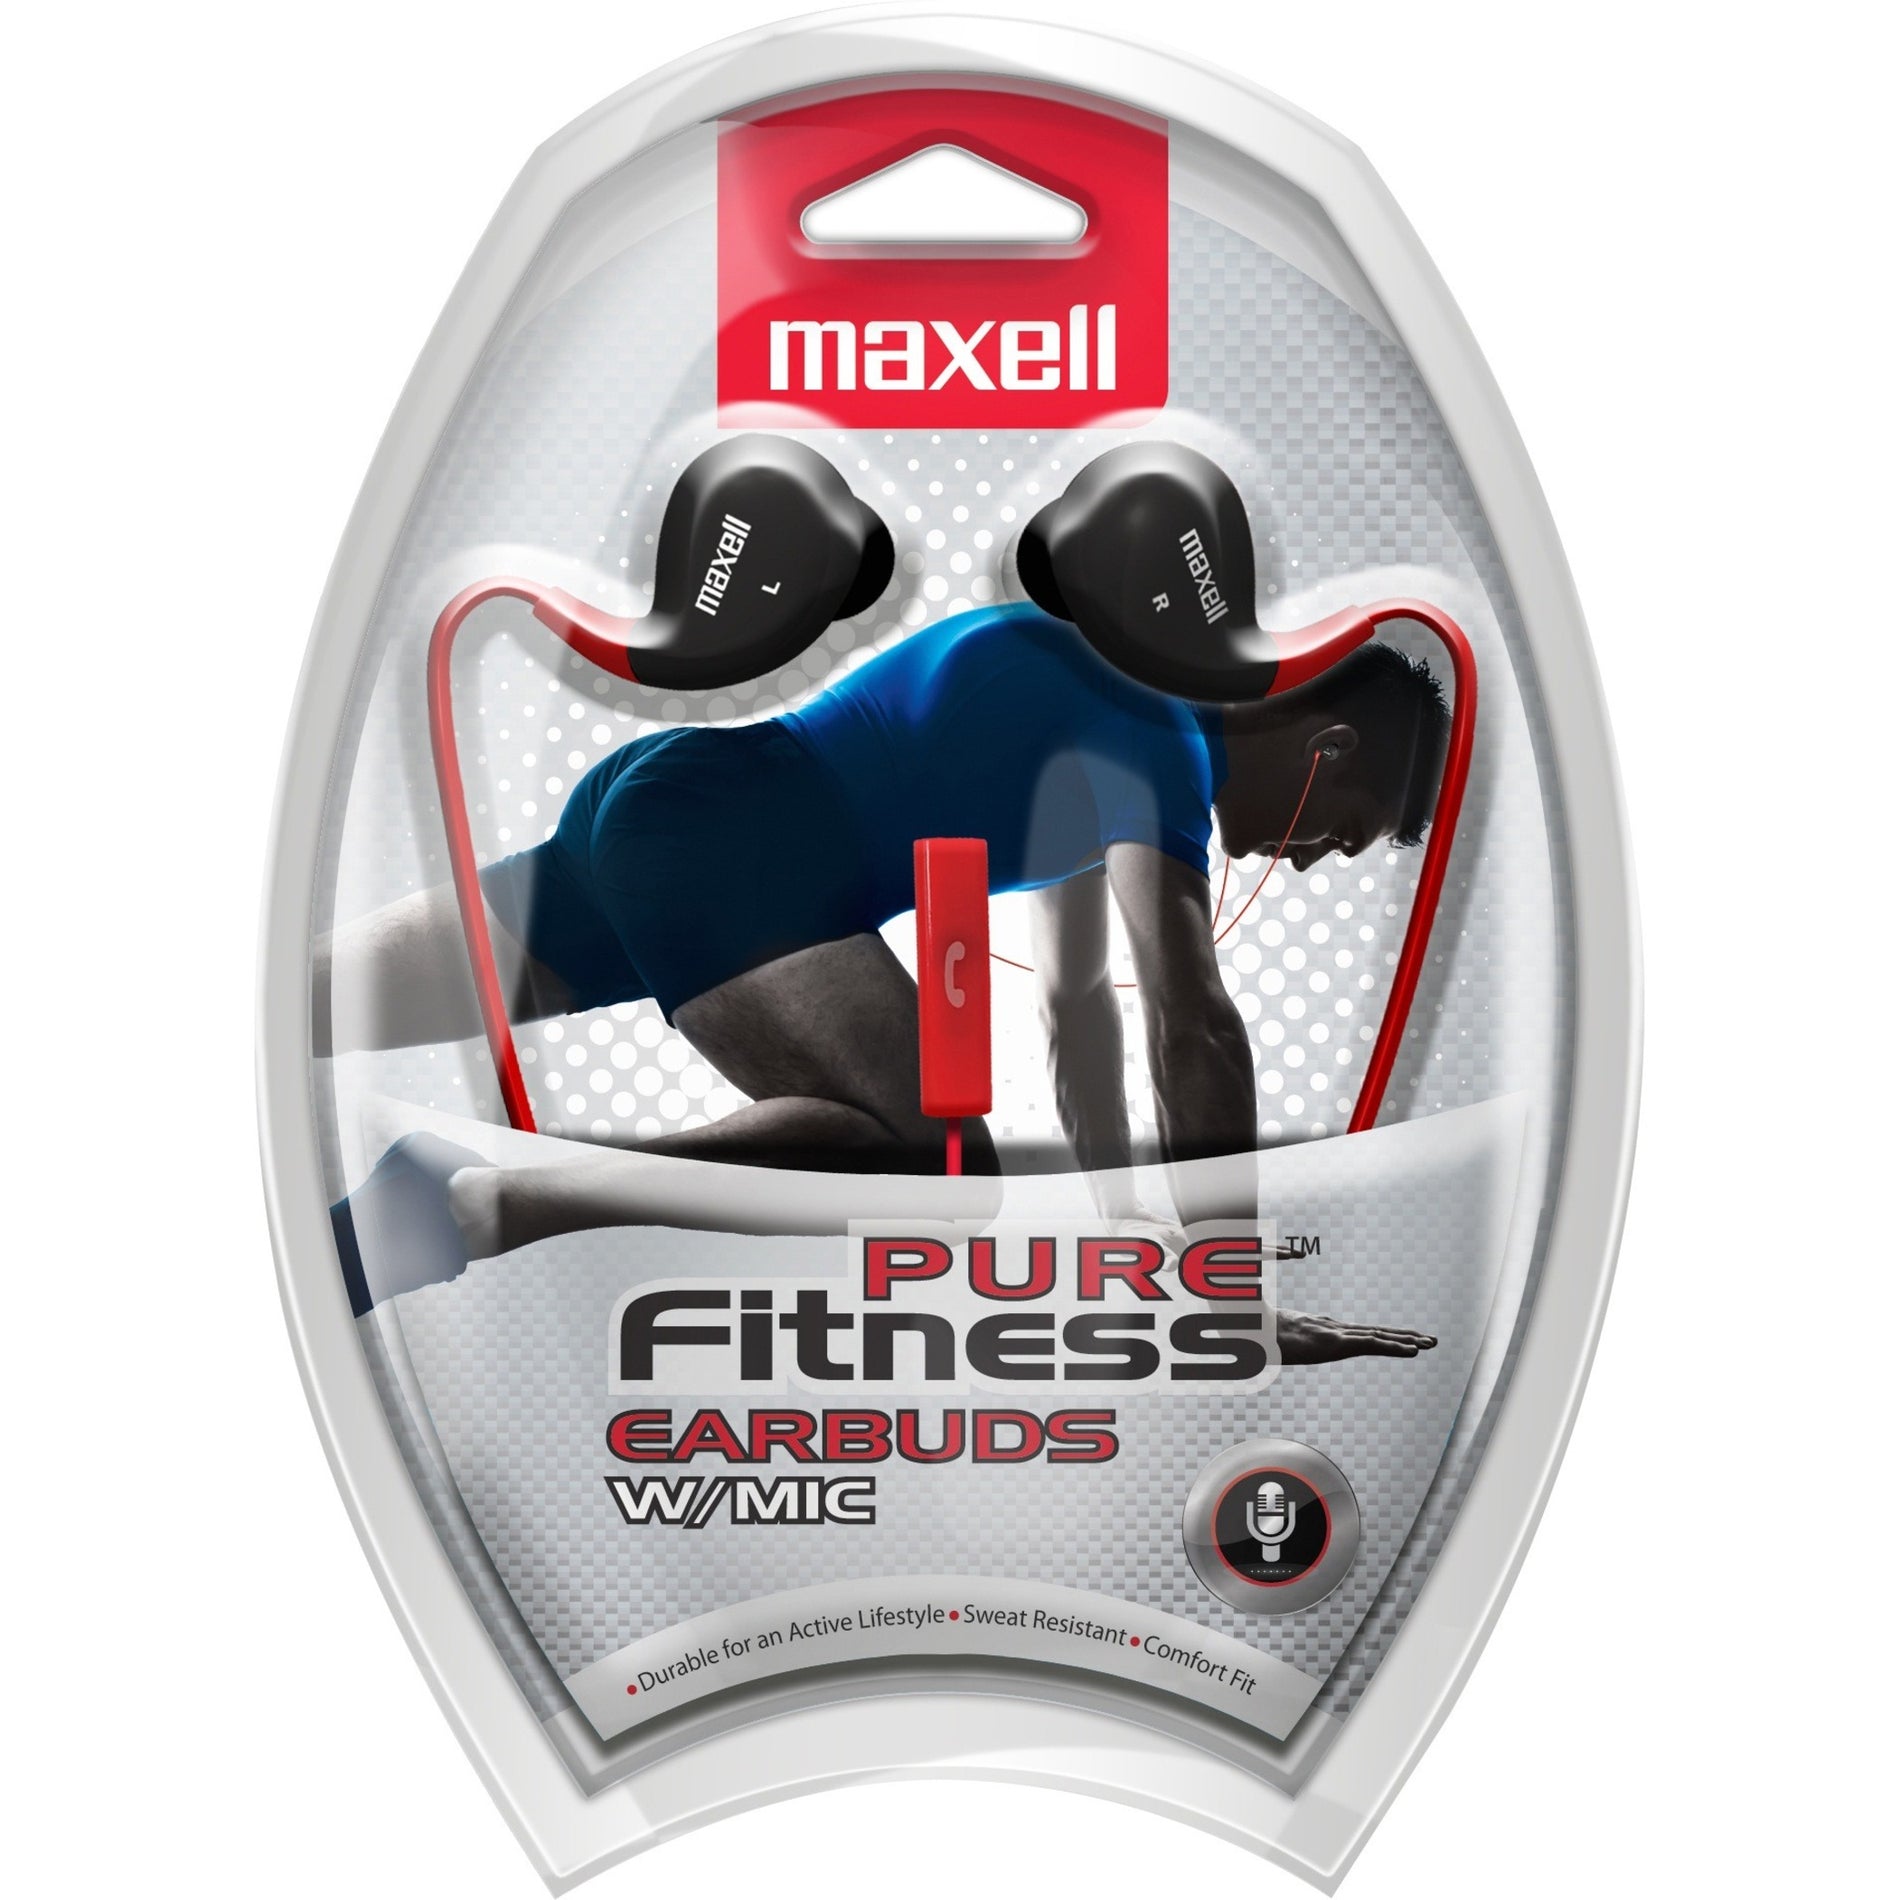 Maxell 192005 Pure Fitness Ear bud with Mic, Sweat Resistant, Moisture Proof, Durable, Comfortable, Stereo Sound, Wired Earset